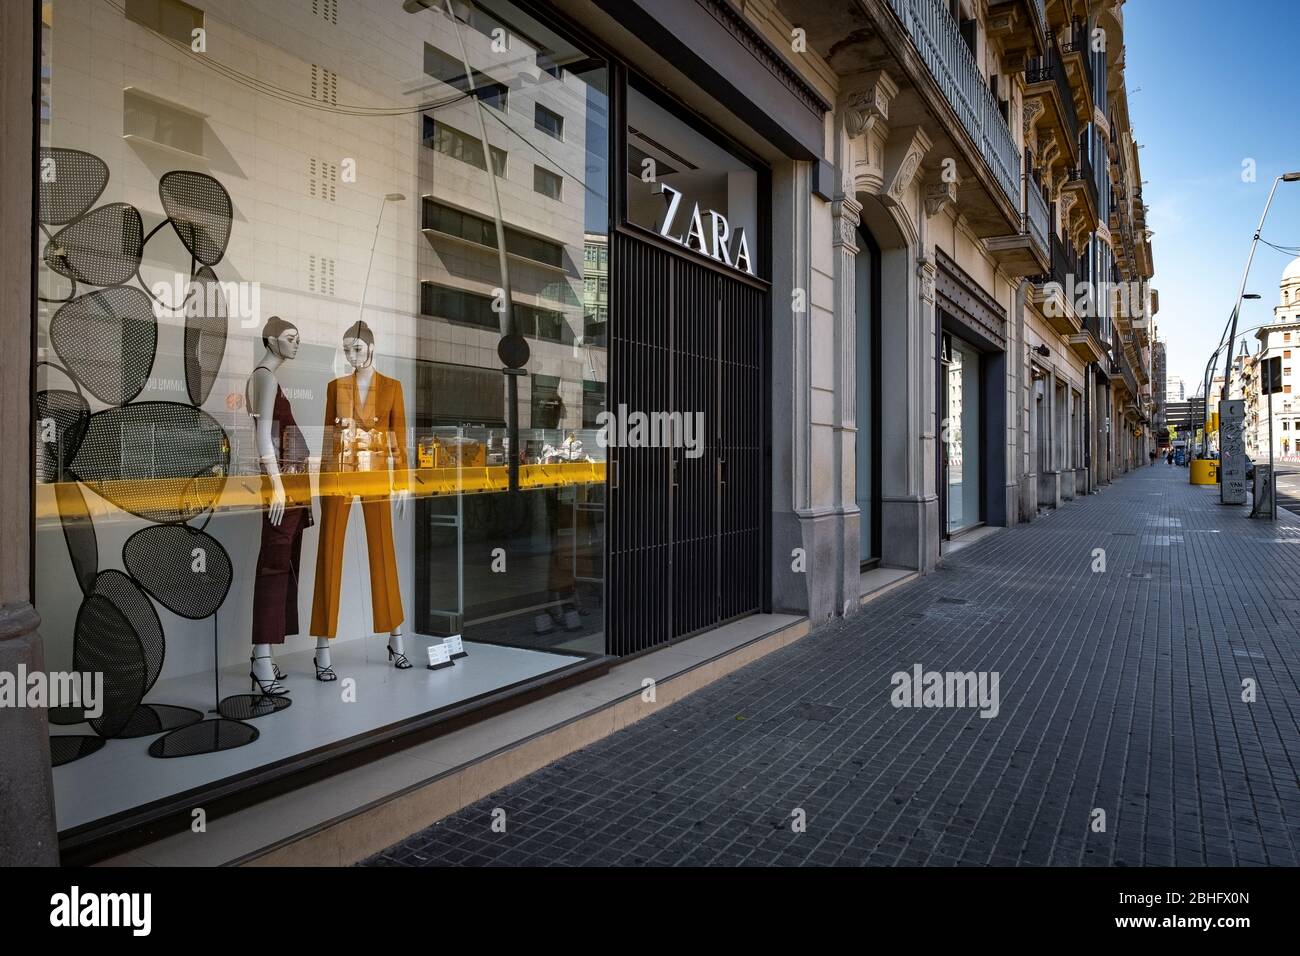 A closed Zara clothing chain store seen on an empty Pelayo street during  the coronavirus crisis.Barcelona faces the 42nd day of confinement and  social distancing. Only authorized establishments are open to the